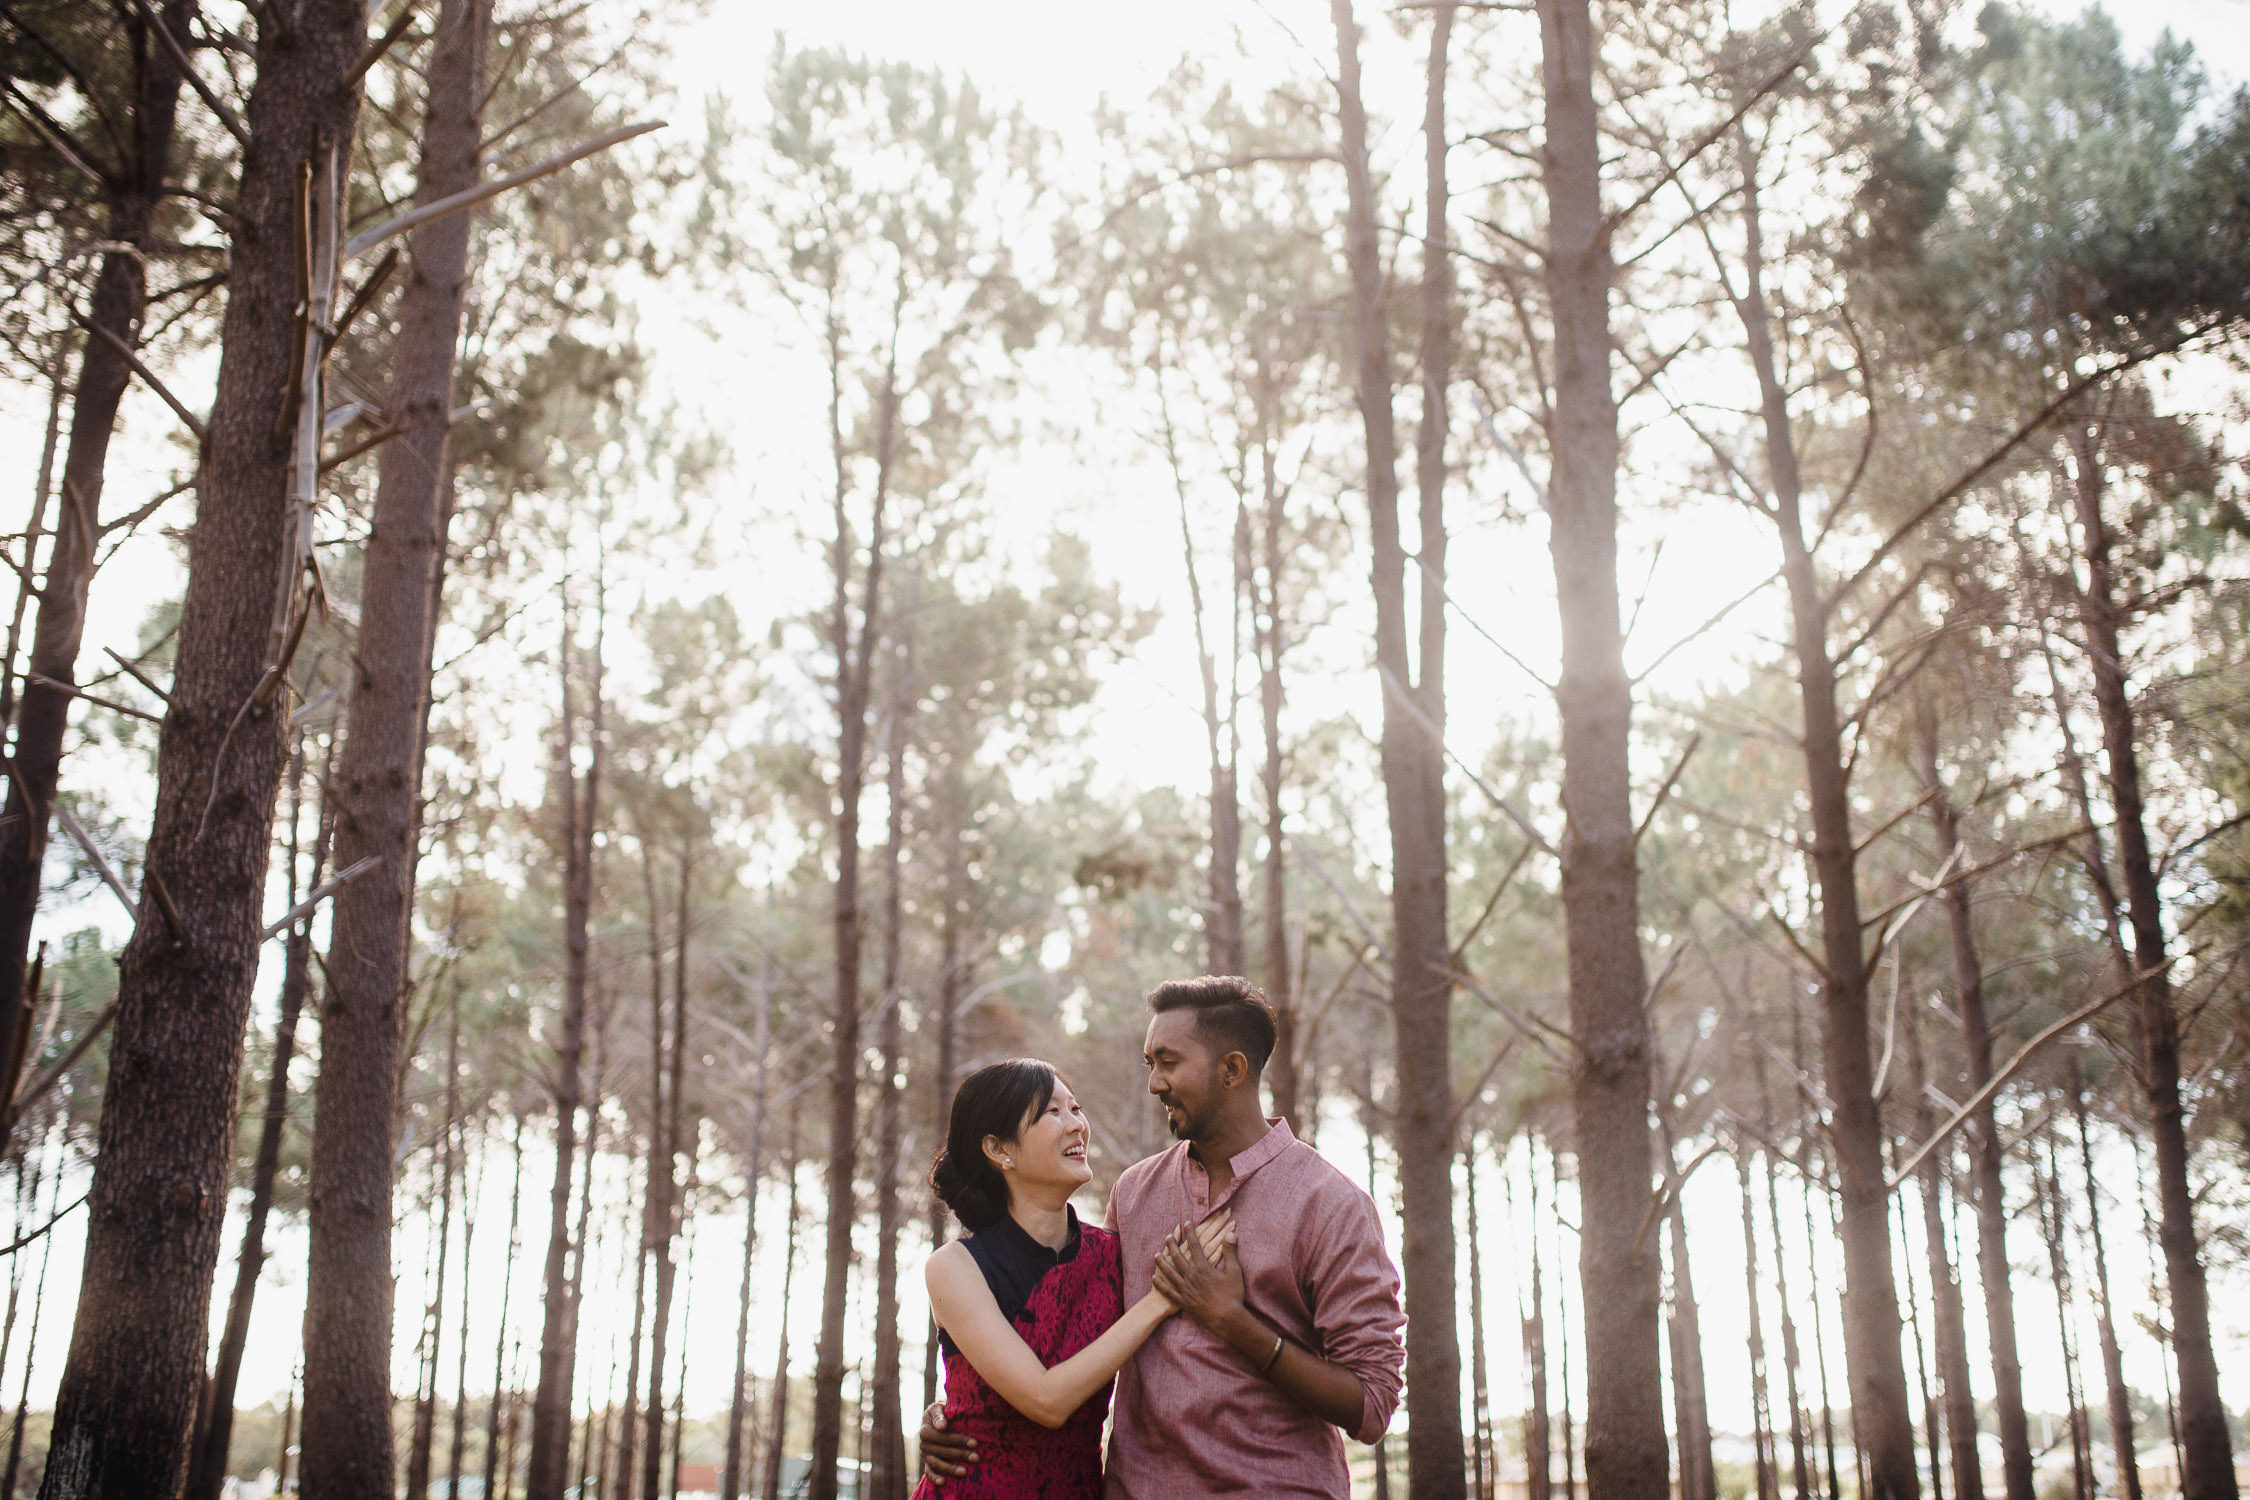 Perth pre-wedding at Lancelin sand dunes, Pinnacles Desert and forest by Naz on OneThreeOneFour 15